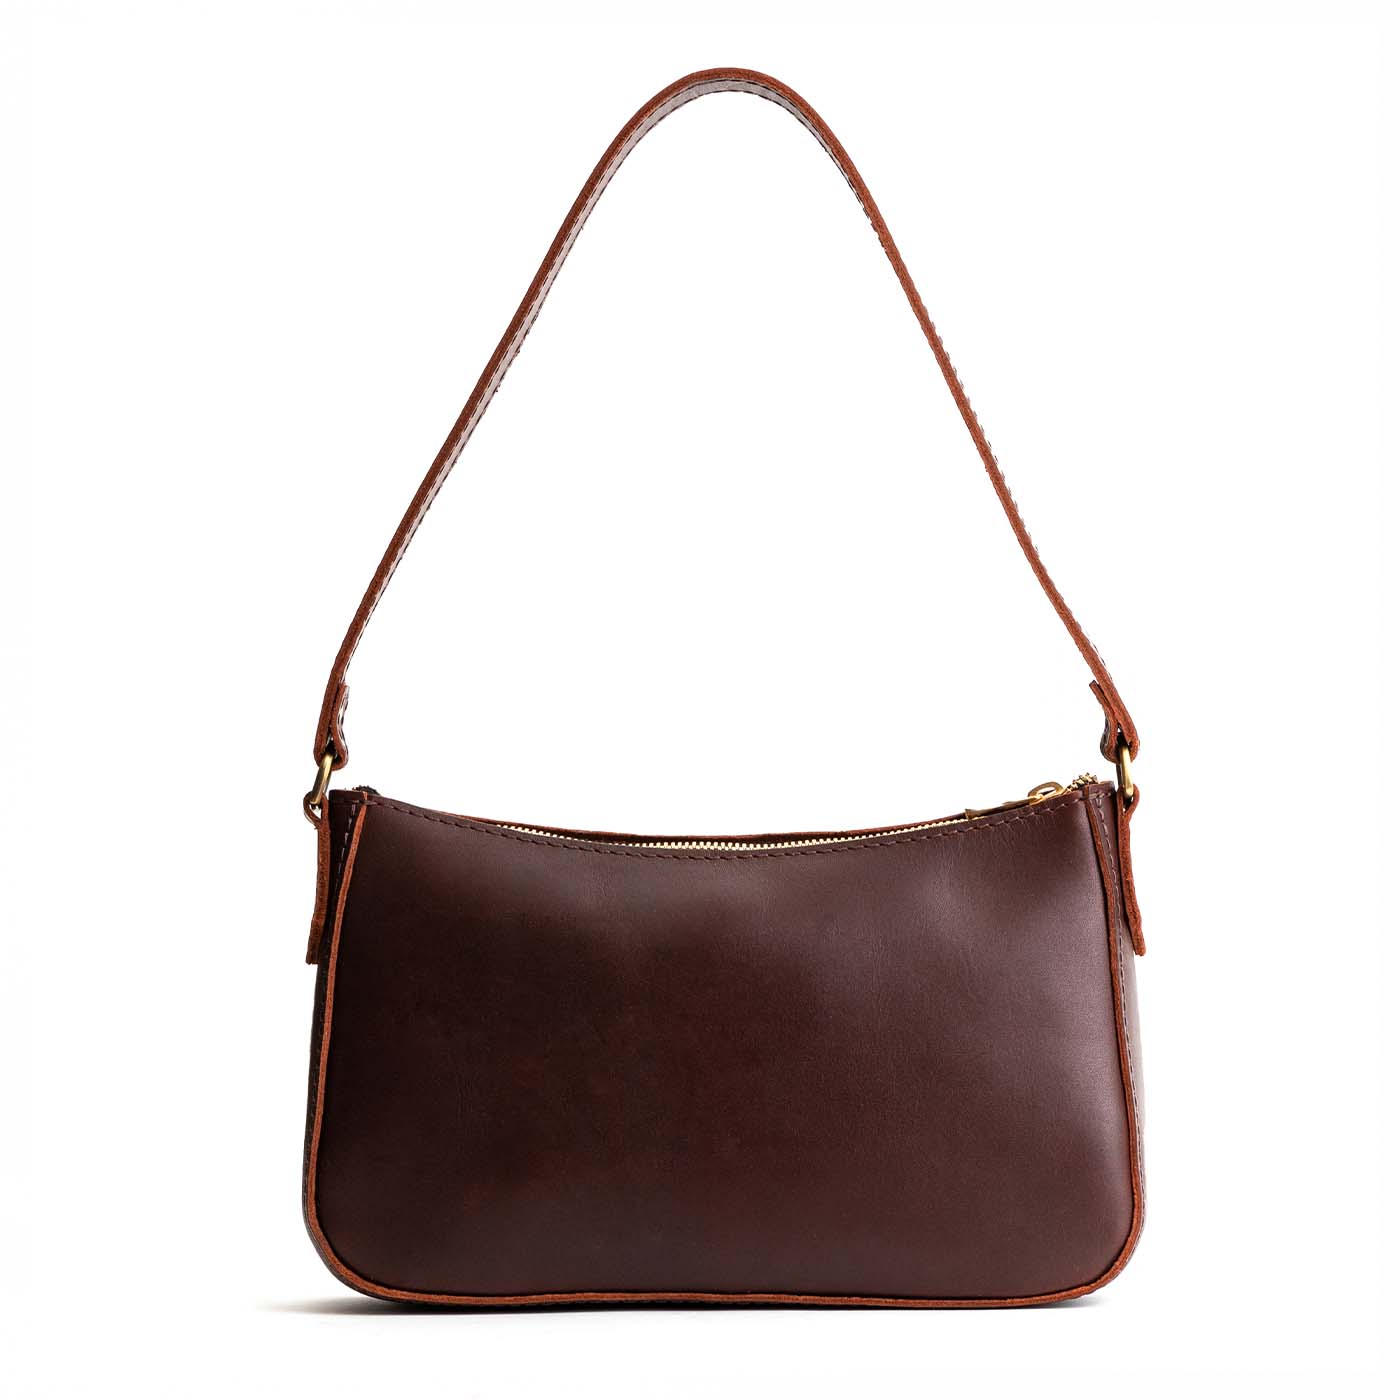 Charlie Phone Bag - Cognac Classic Leather